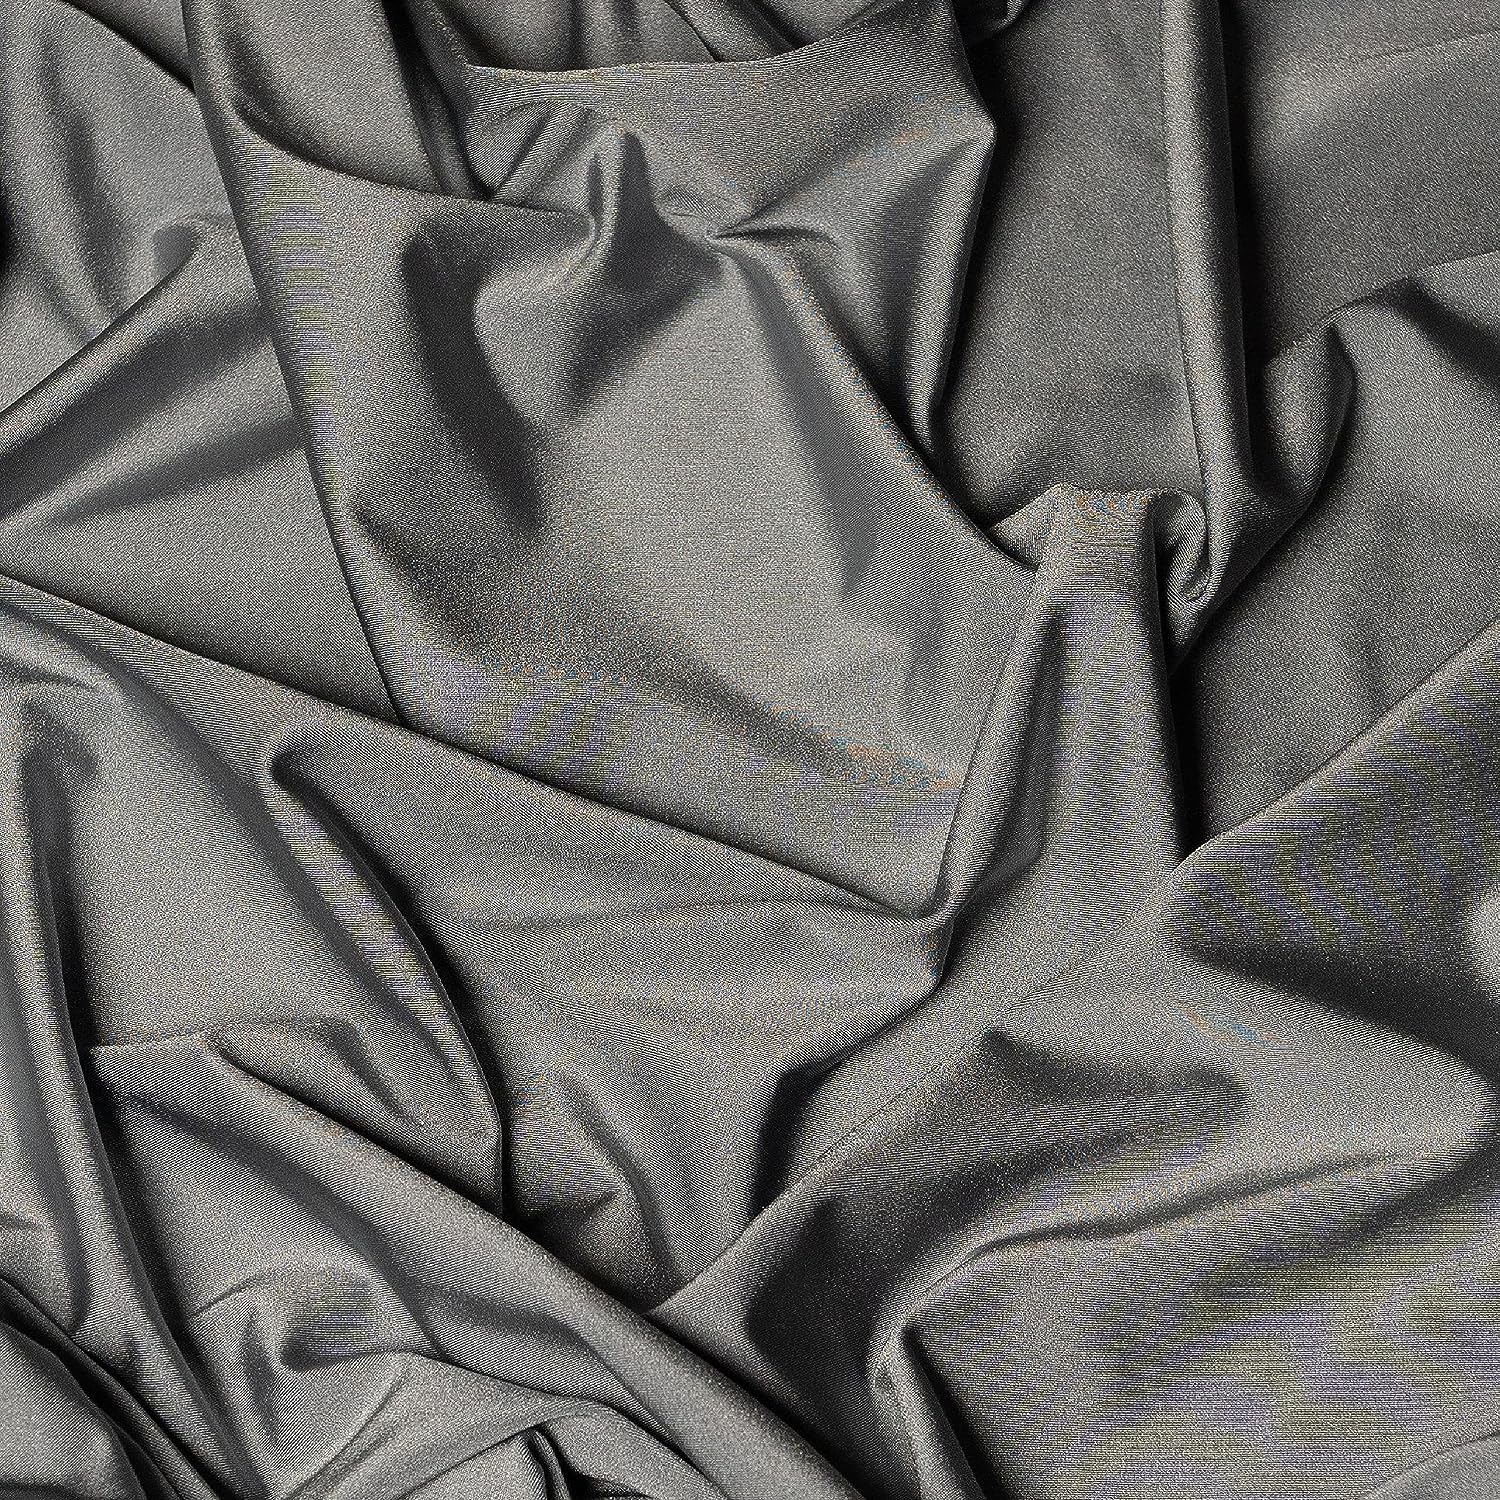 Silver Luxury Nylon Spandex Fabric By The YardICE FABRICSICE FABRICSBy The Yard (58" Width)Silver Luxury Nylon Spandex Fabric By The Yard ICE FABRICS